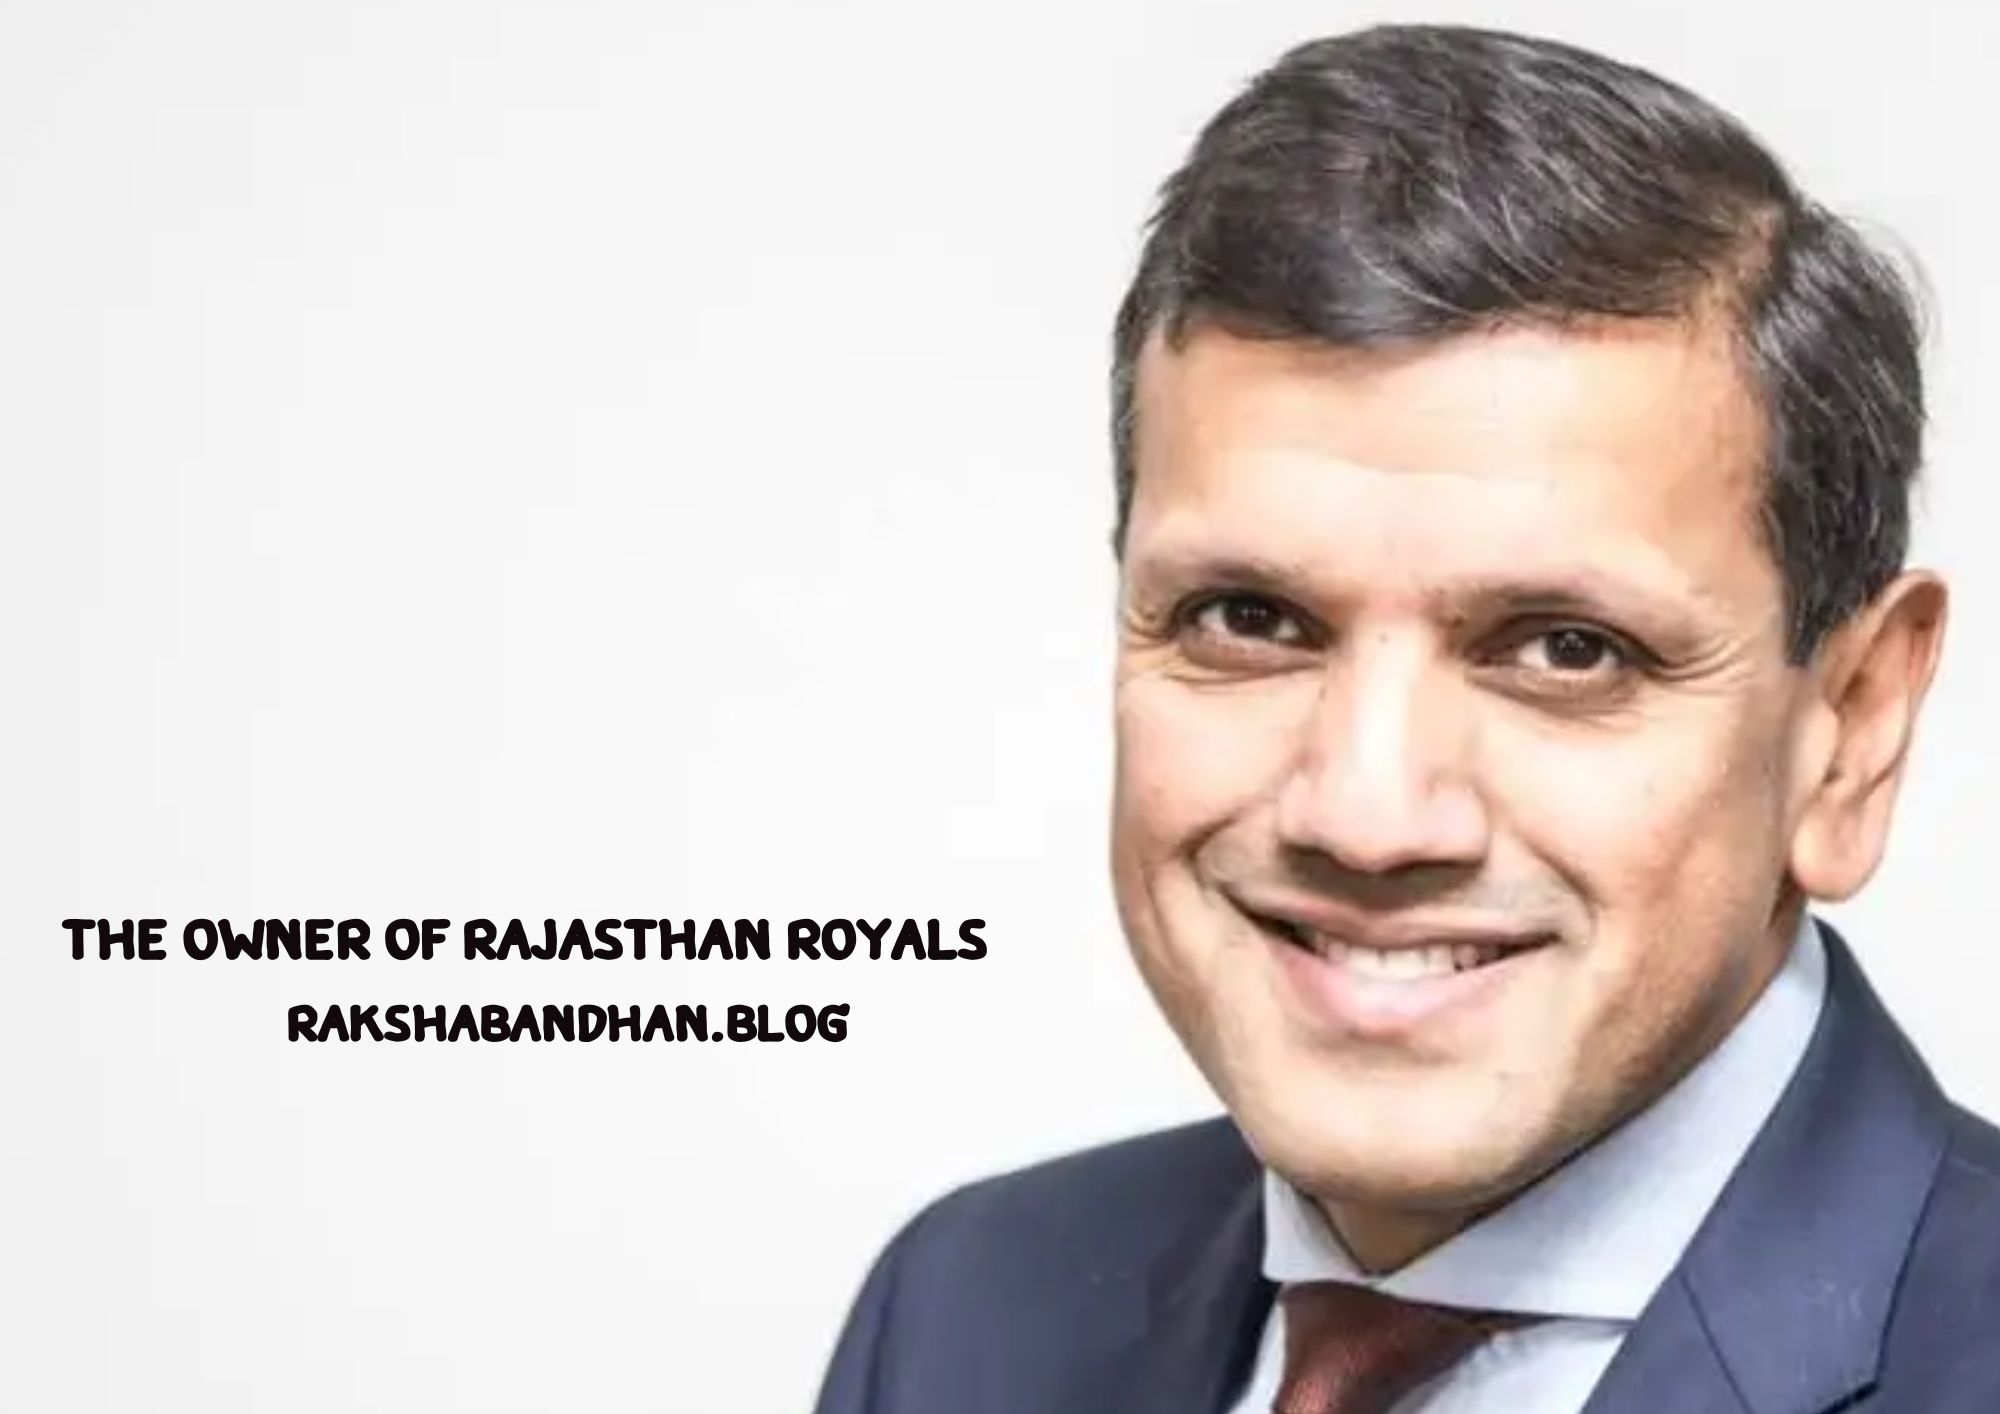 Who Is The Owner Of Rajasthan Royals